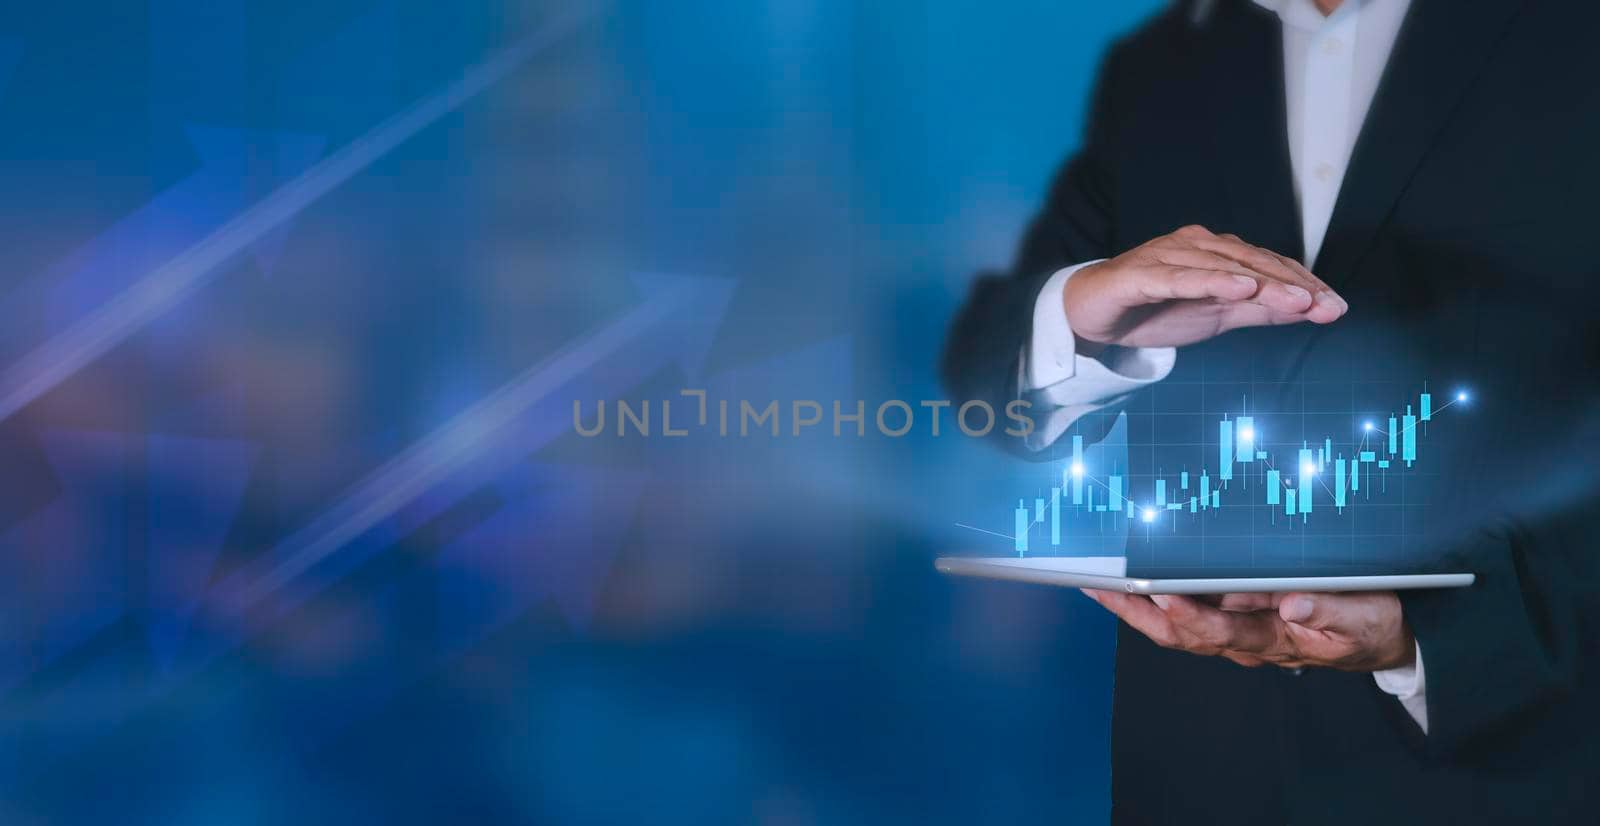 Hand of businessman holding tablet analysis stock market graph growth and increase of chart positive indicators. Hand holding tablet show stock chart on light gray background. copy space banner